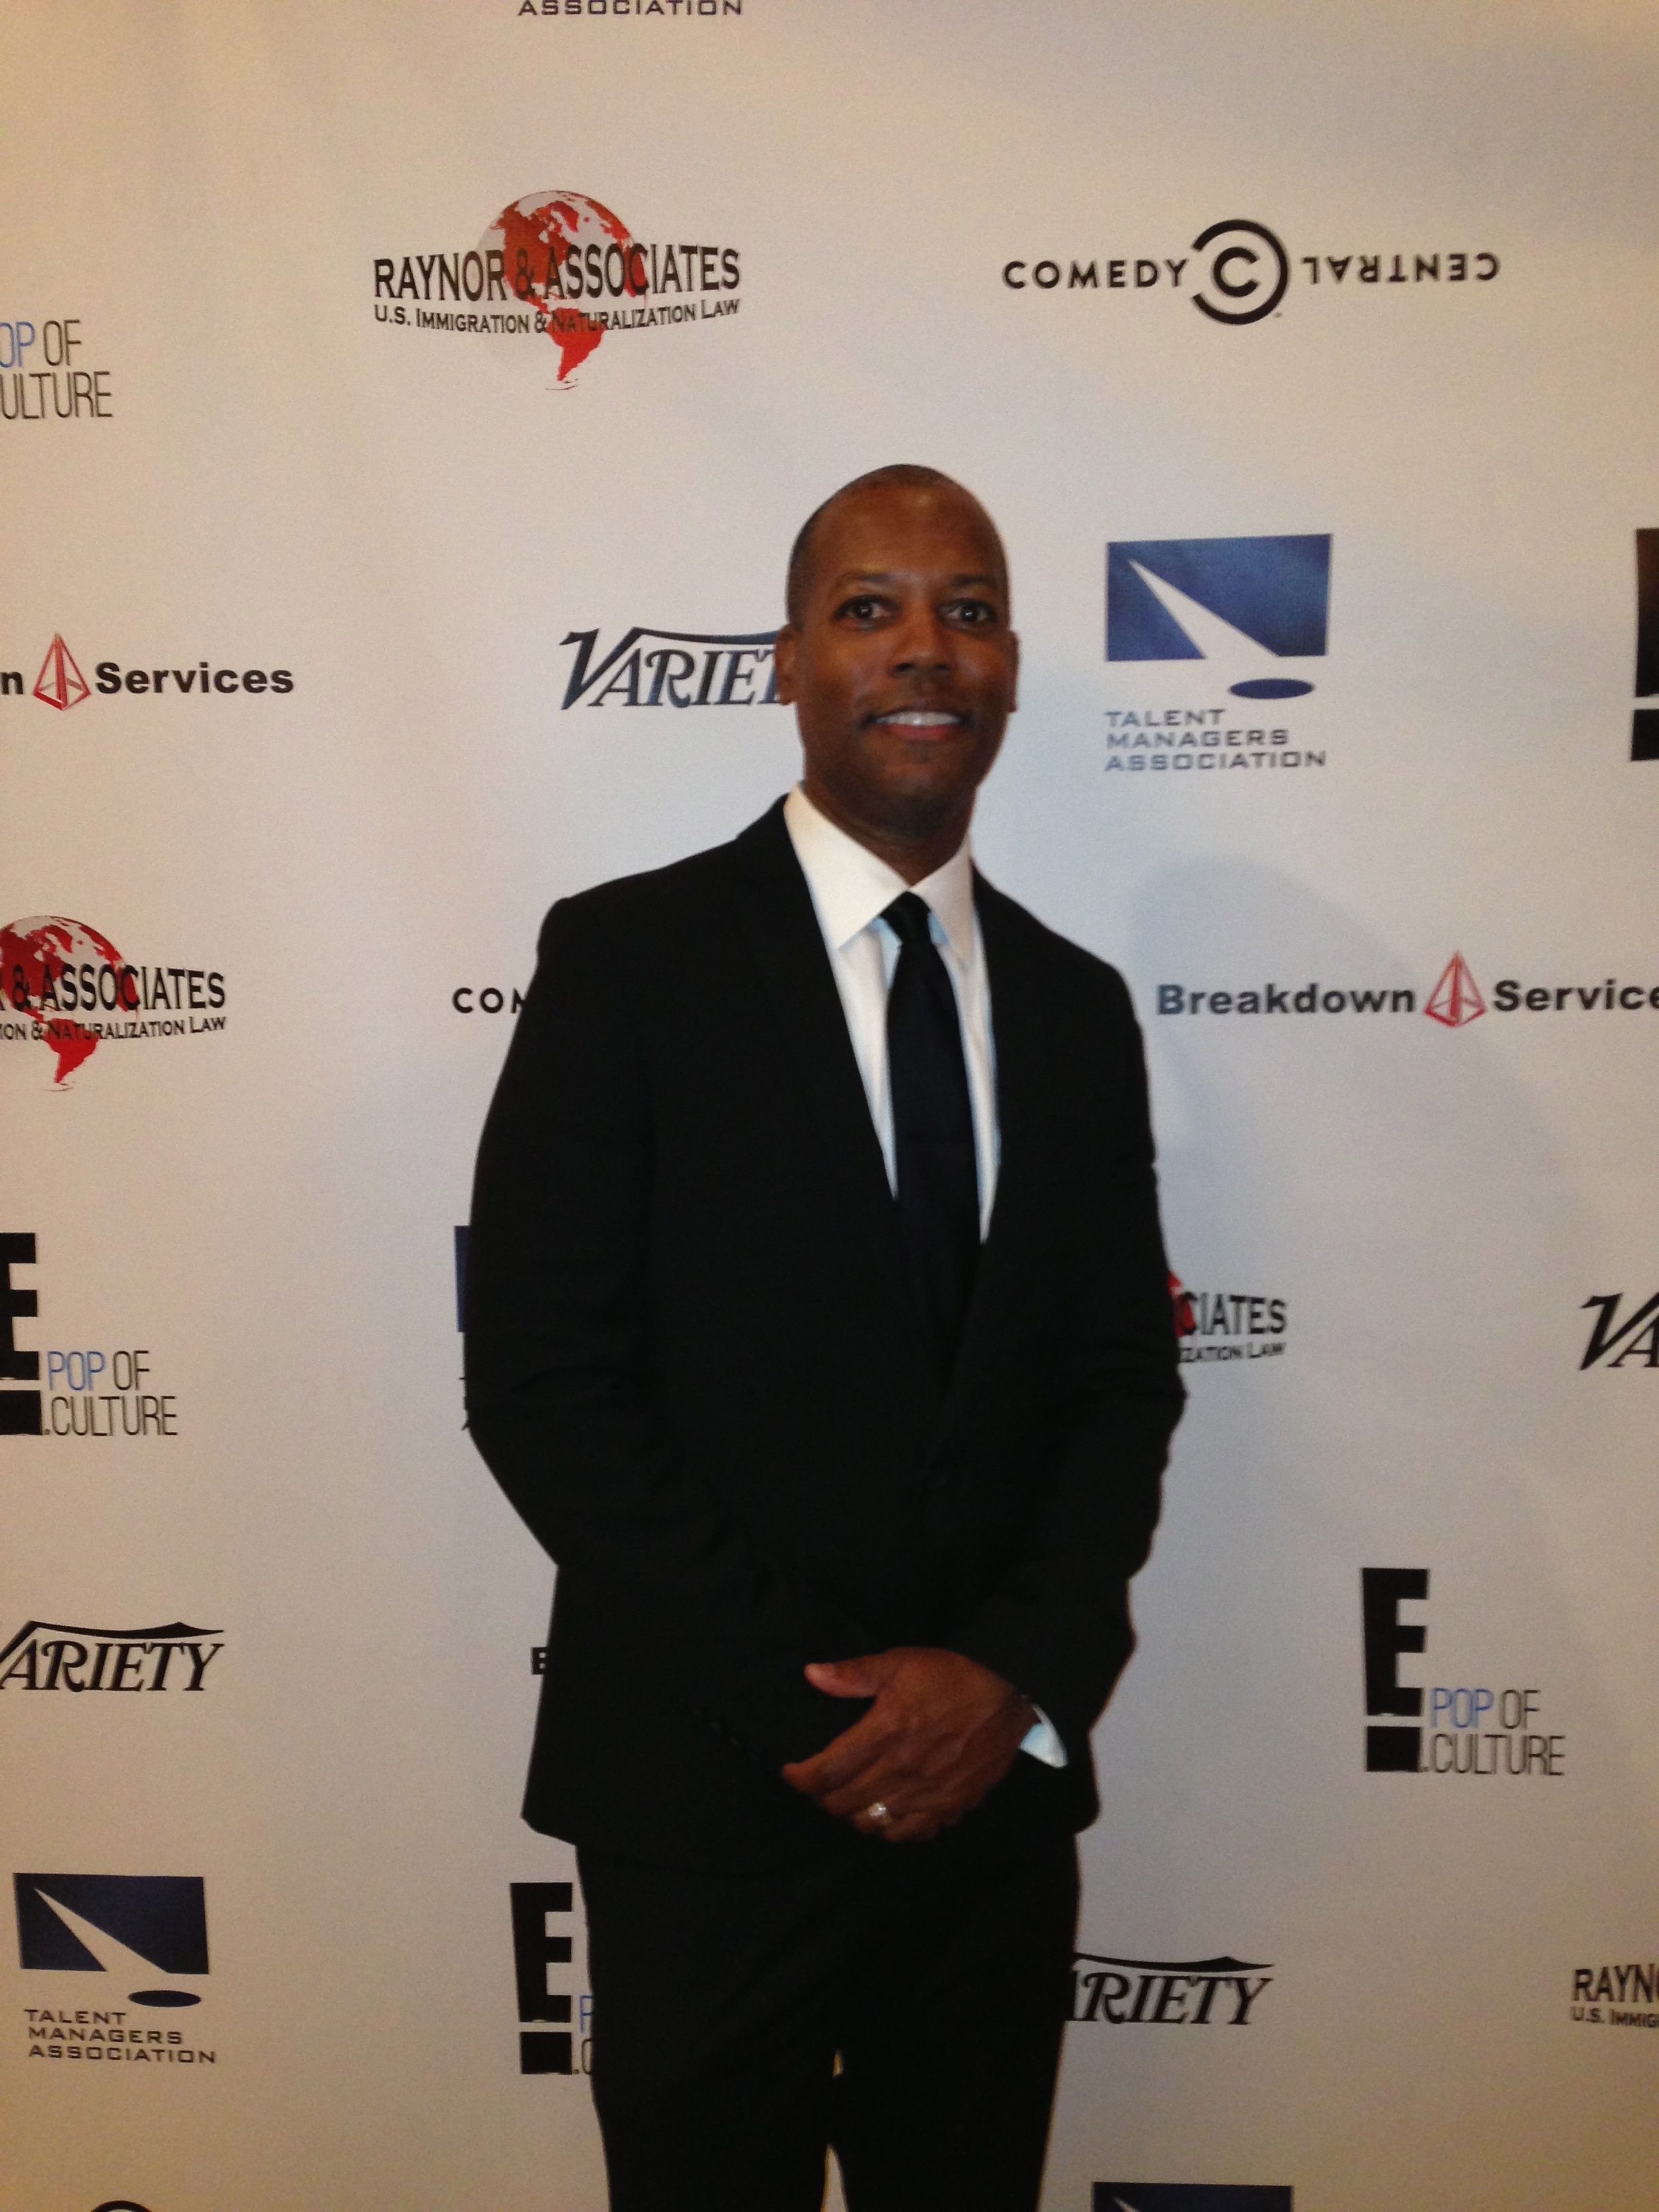 Troy Allen, Manager of CMA ENTERTAINMENT